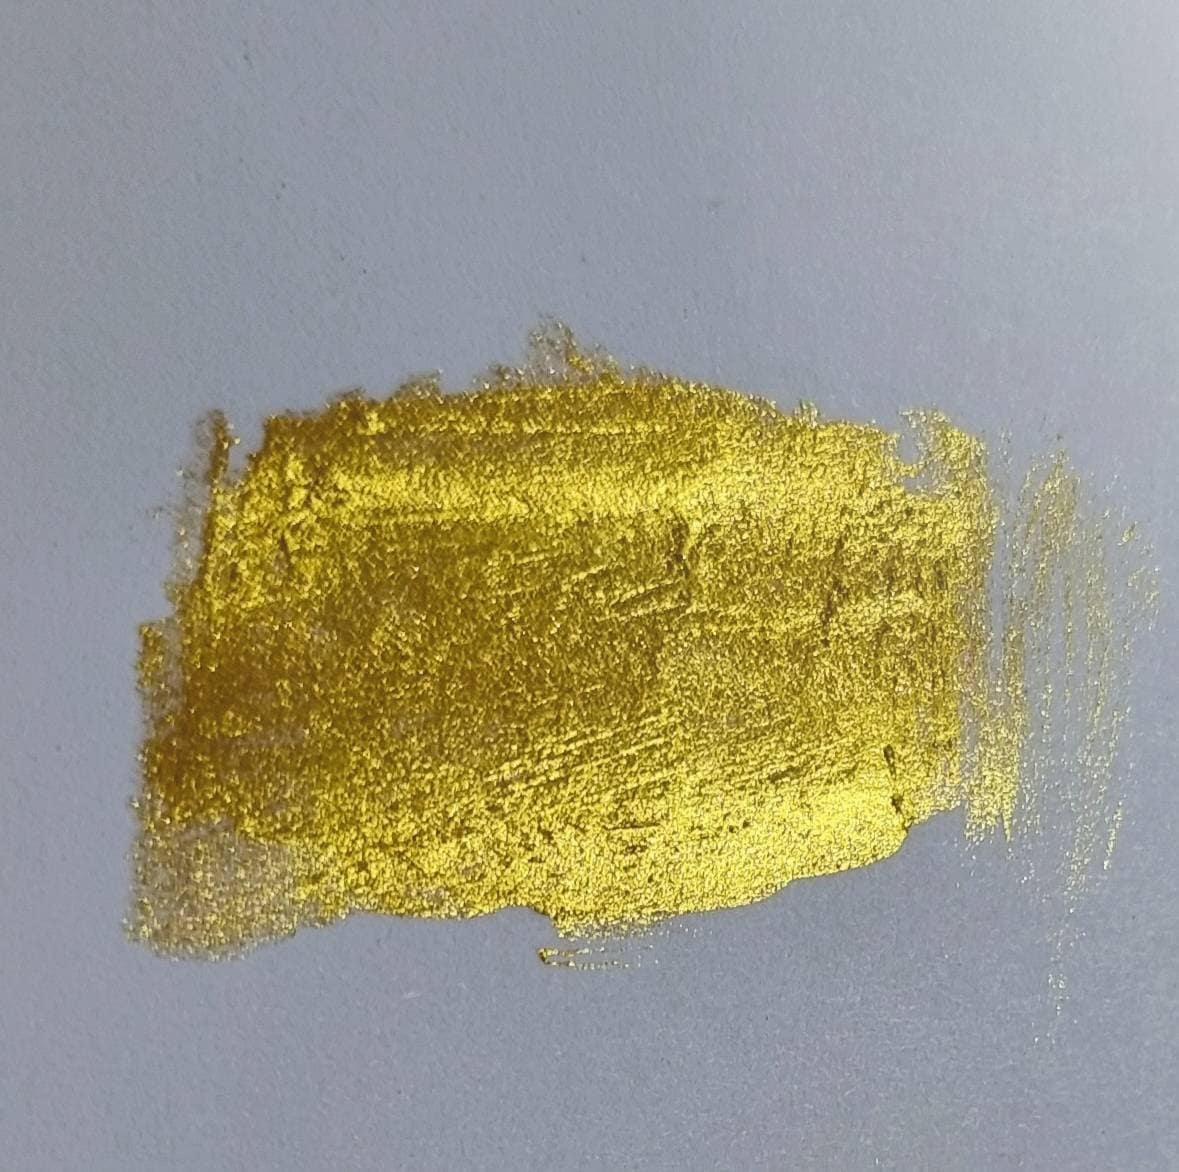 Homemade acrylic gold glitter paint/how to make gold glitter paint at home  